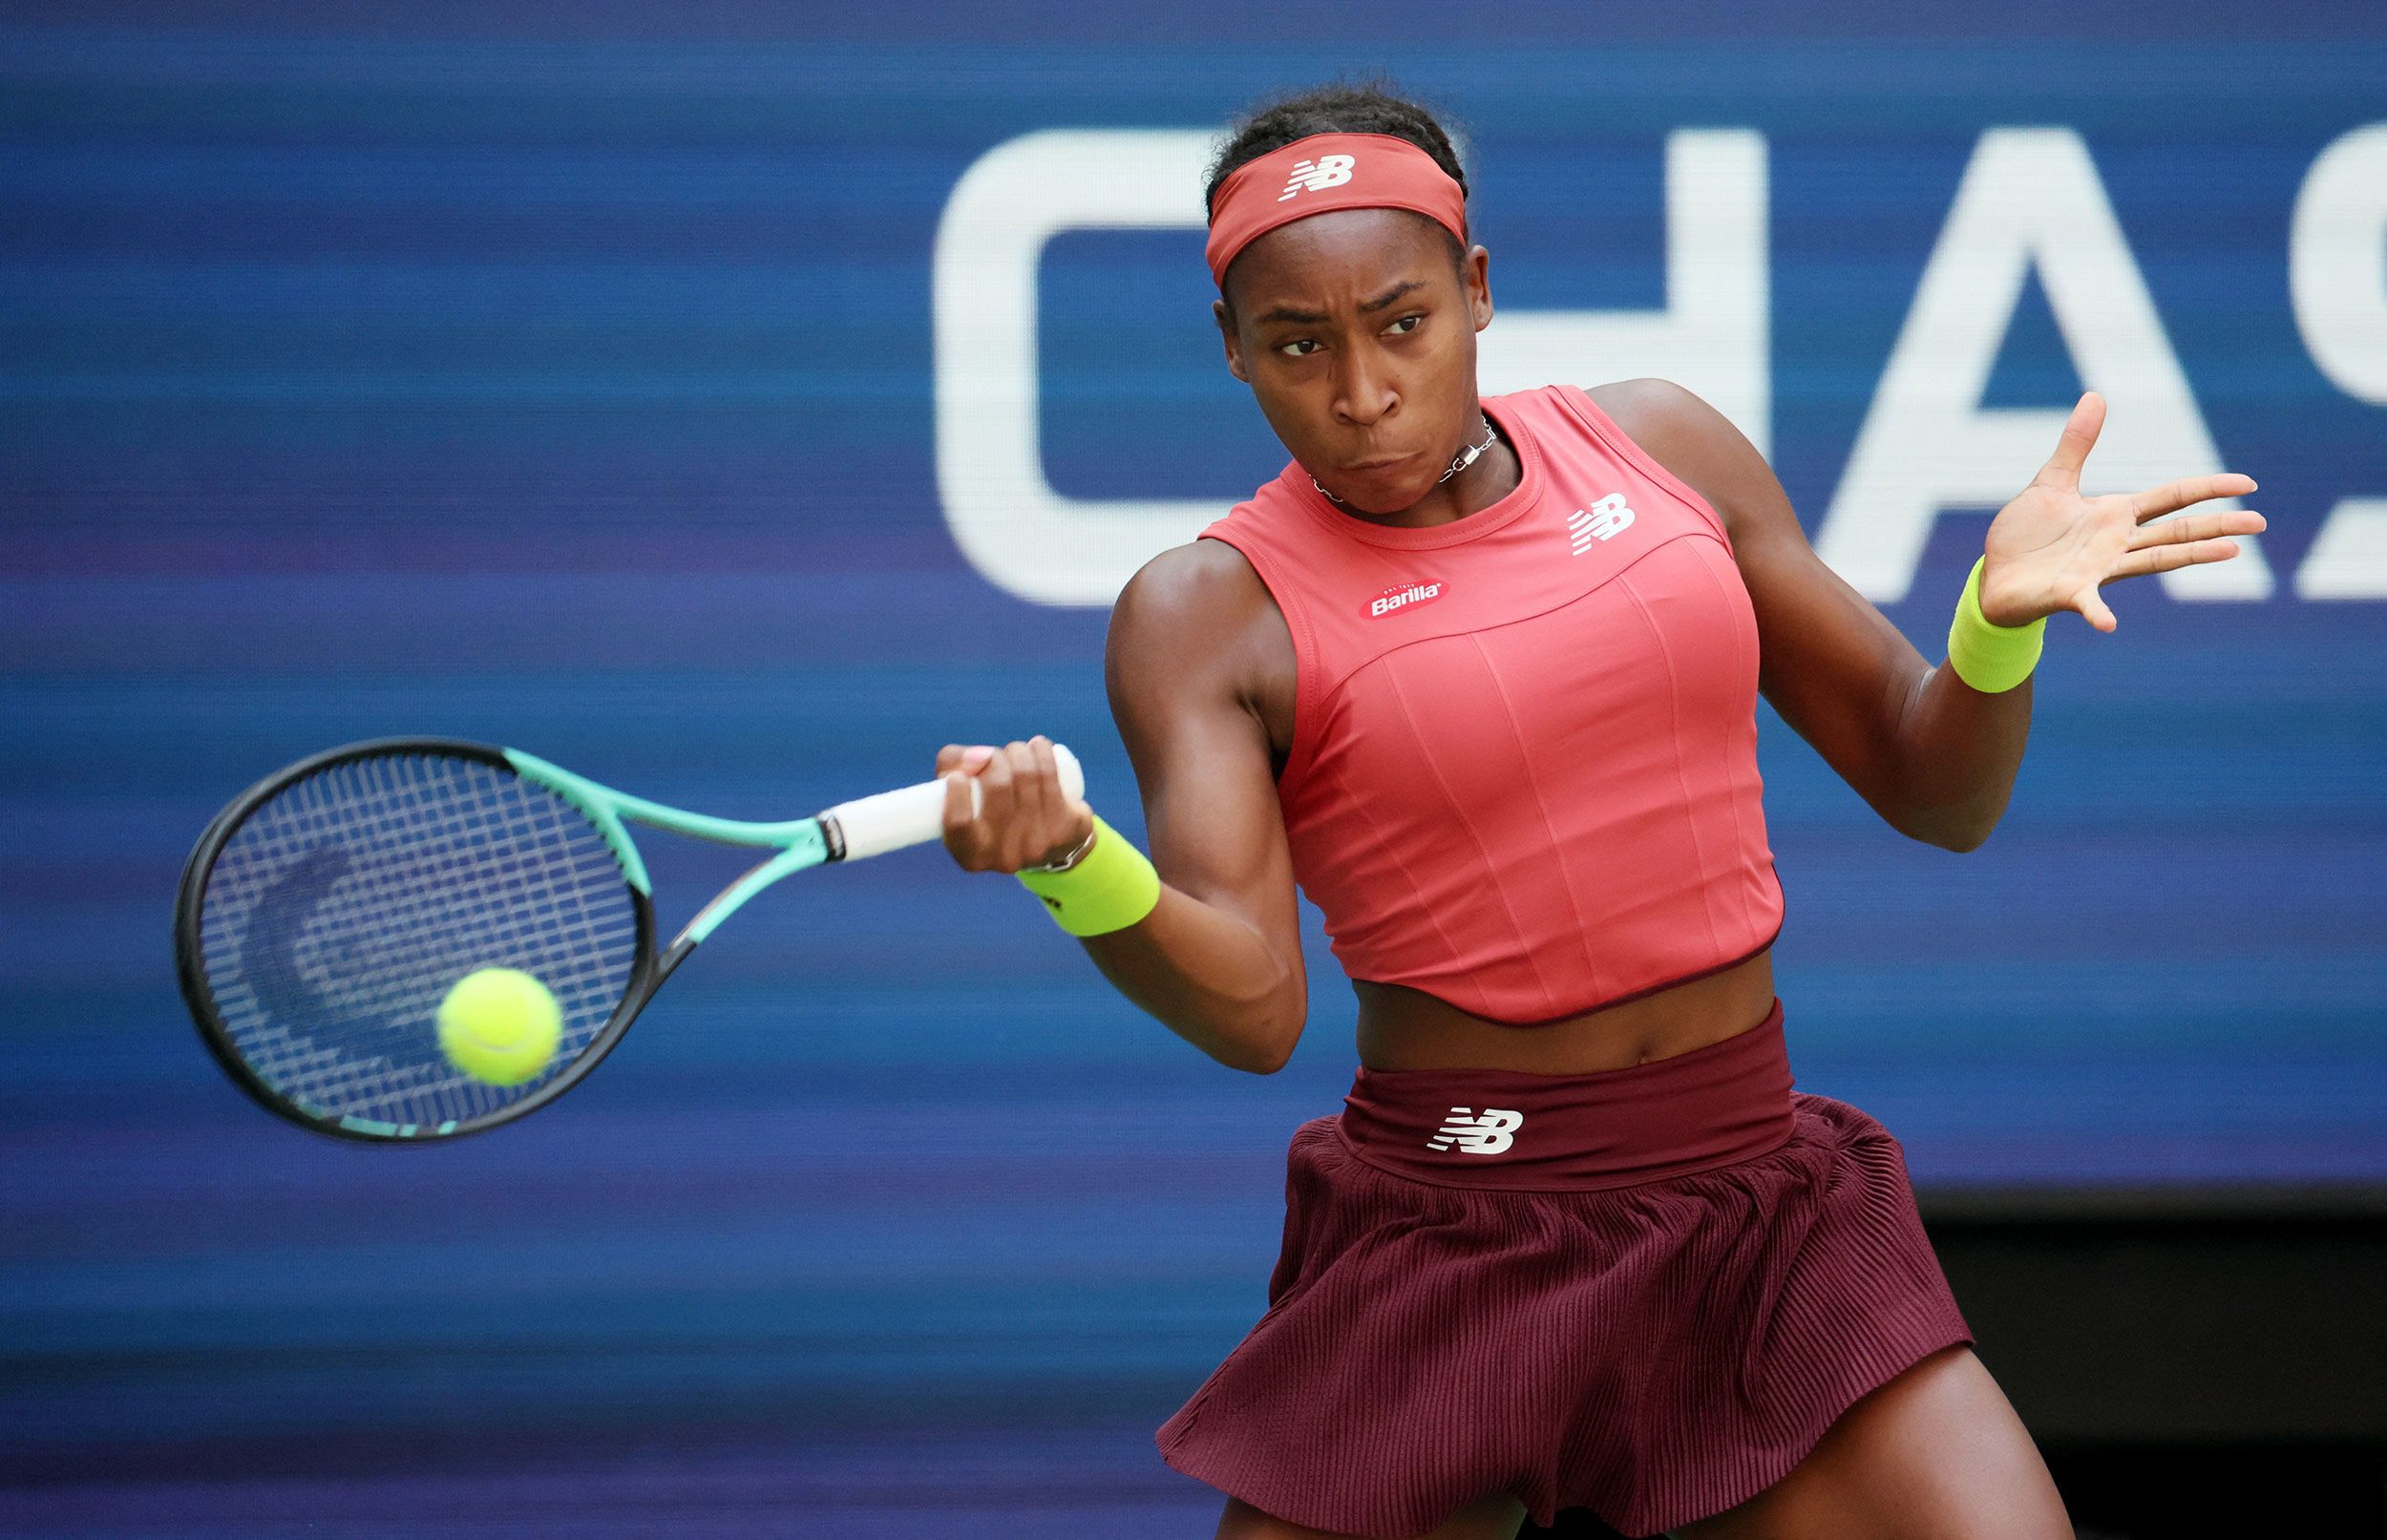 Coco Gauff: How putting her life 'into perspective' helped tennis